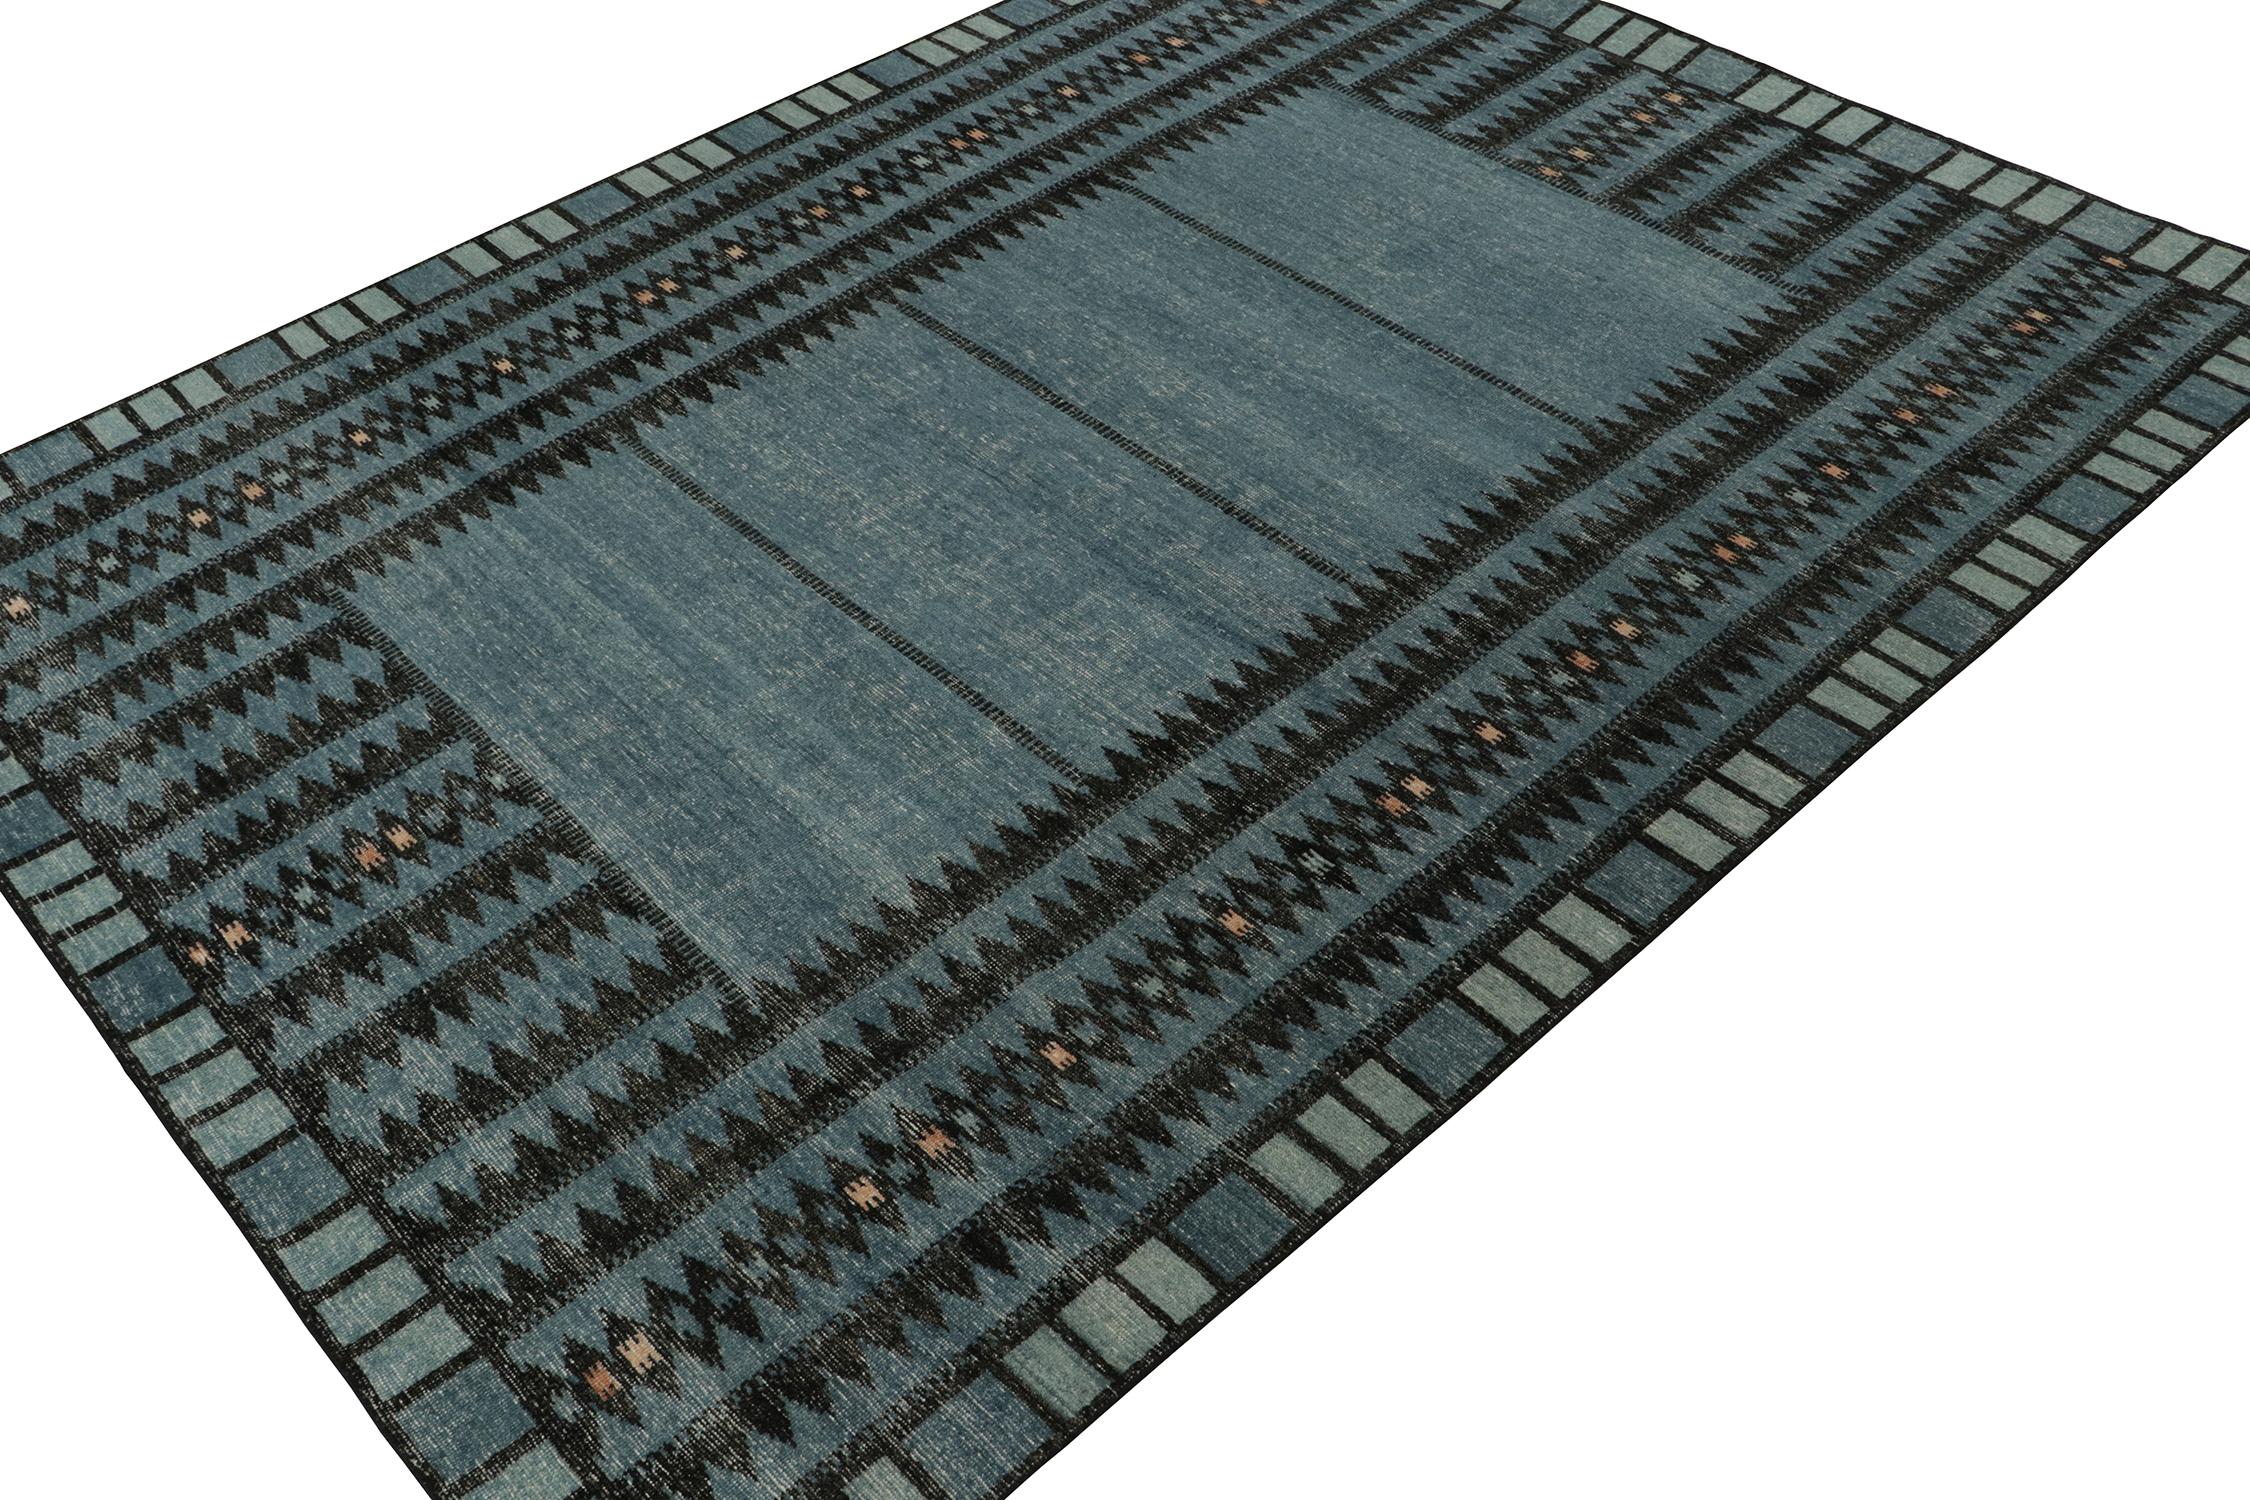 ??A 9x12 modern rug, hand-knotted in distressed style wool and cotton from Rug & Kilim’s Homage Collection.

Further on the Design:

This design recaptured mid-century Scandinavian rug designs, and favors blue and black geometric patterns with